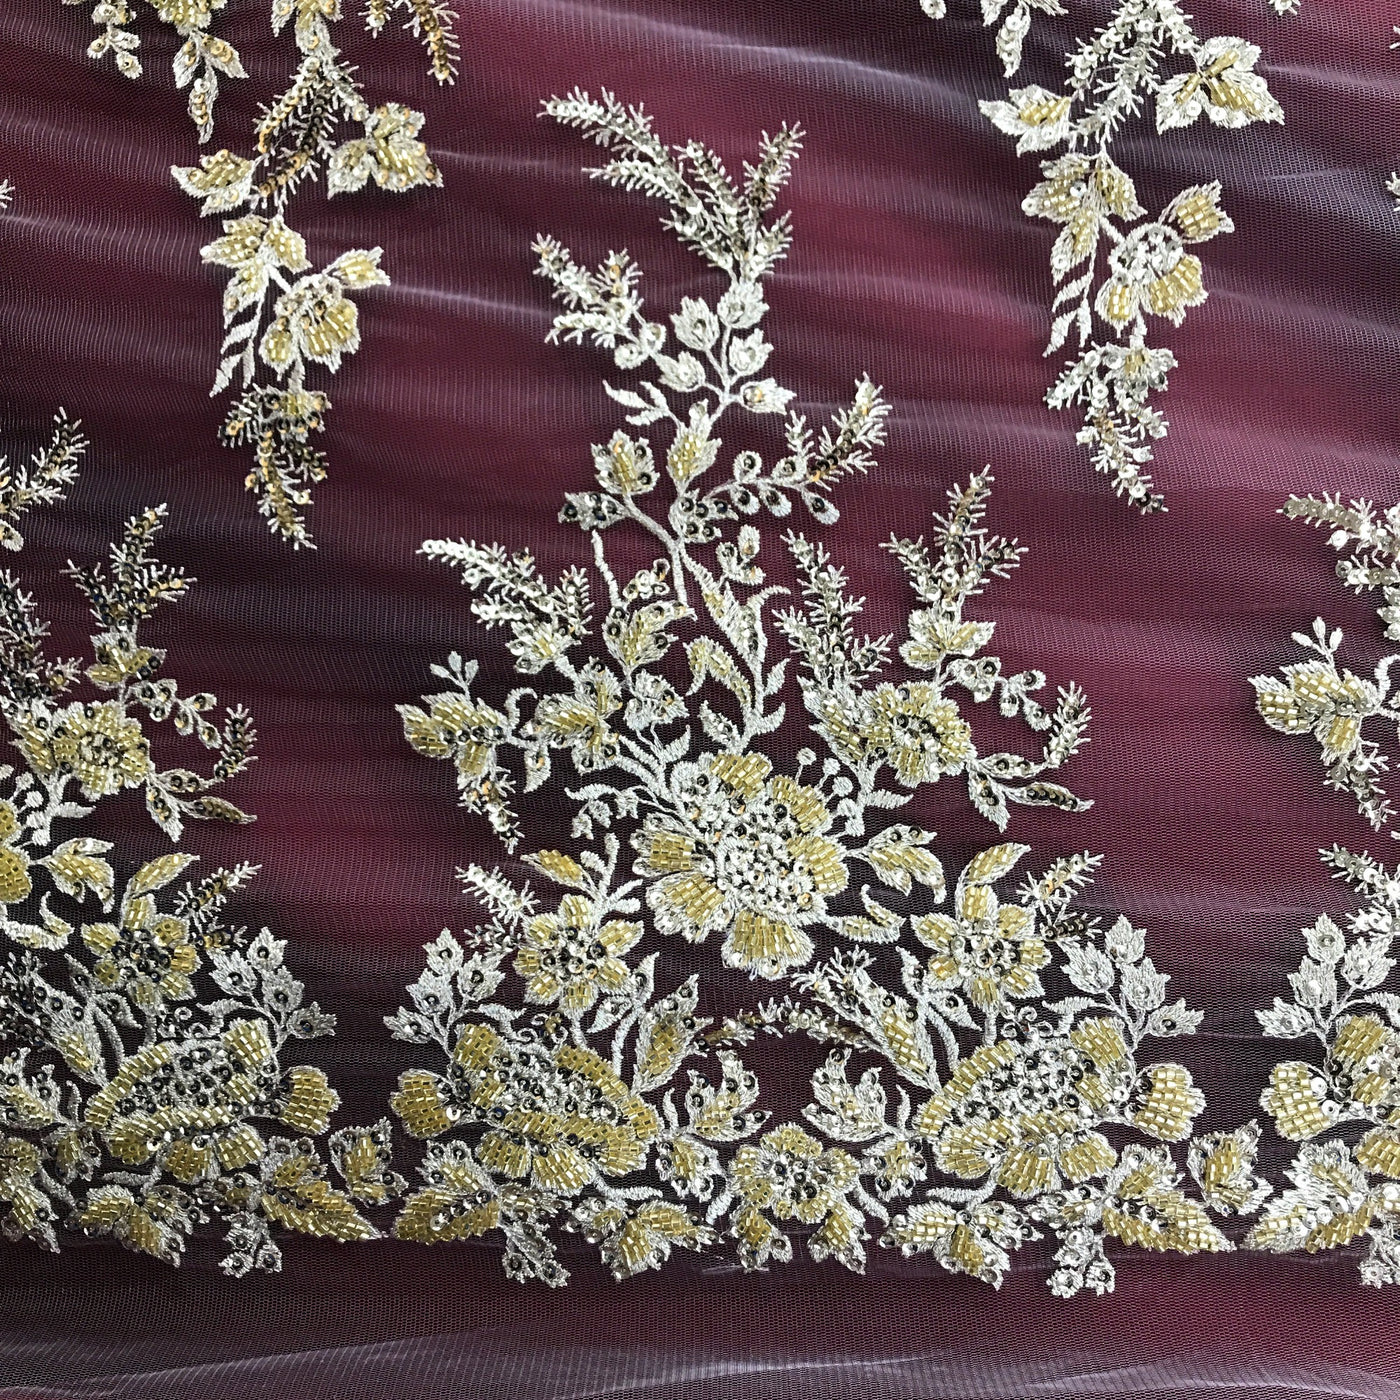 Embroidered & Heavily Beaded Fabric on net.  Sold by the yard.  Lace Usa